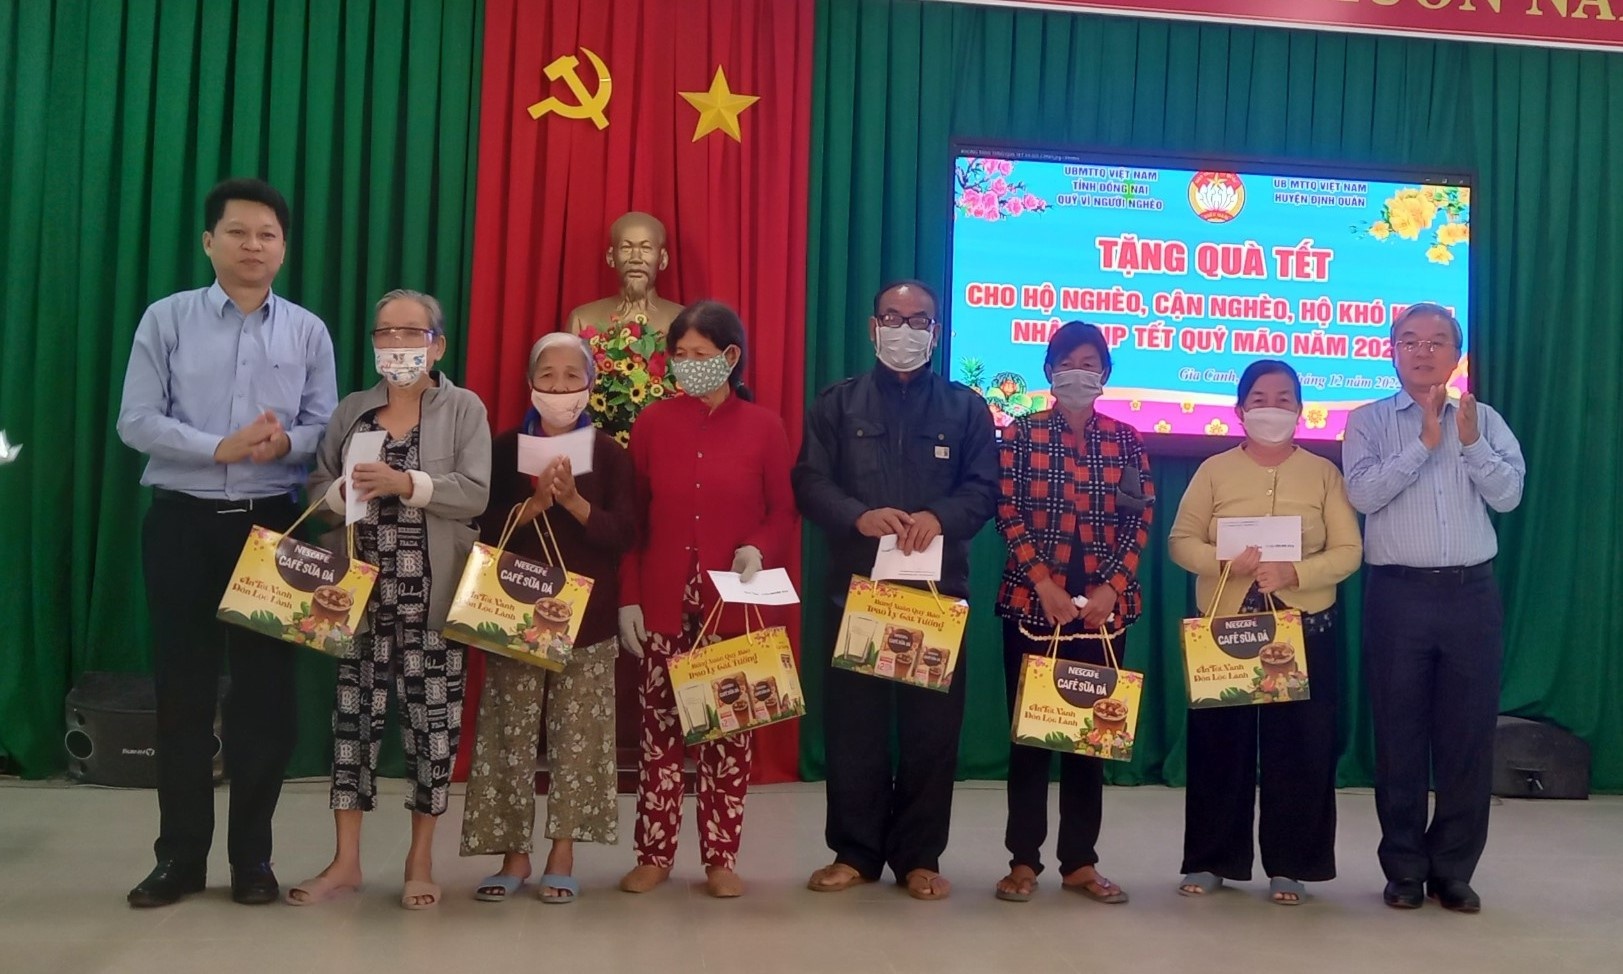 Nestlé Vietnam supports 8,000 disadvantaged people for Lunar New Year